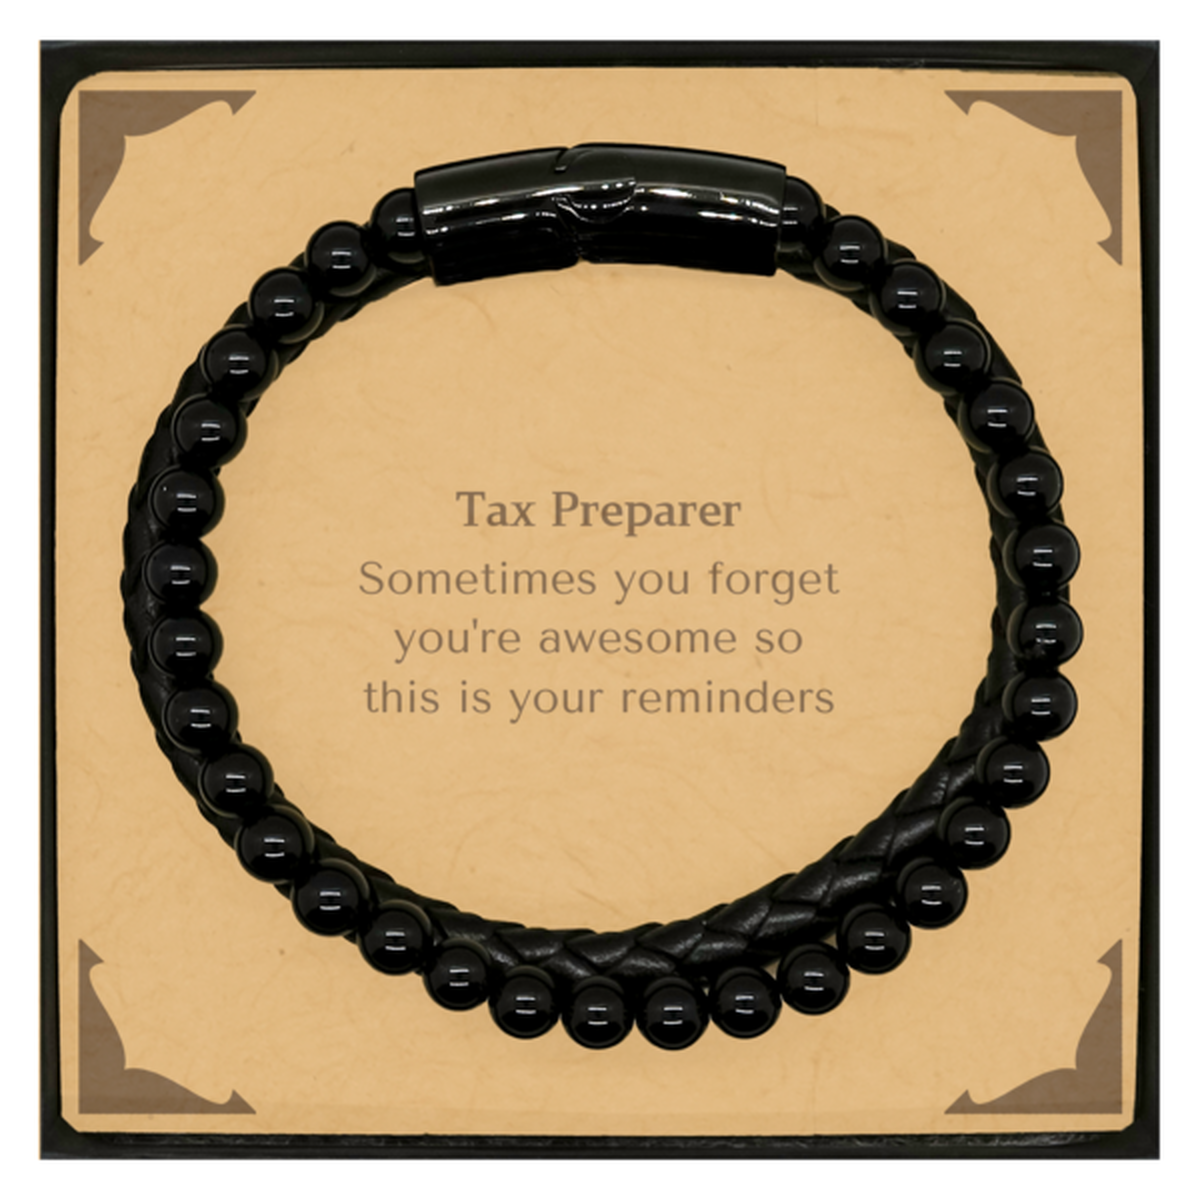 Sentimental Tax Preparer Stone Leather Bracelets, Tax Preparer Sometimes you forget you're awesome so this is your reminders, Graduation Christmas Birthday Gifts for Tax Preparer, Men, Women, Coworkers